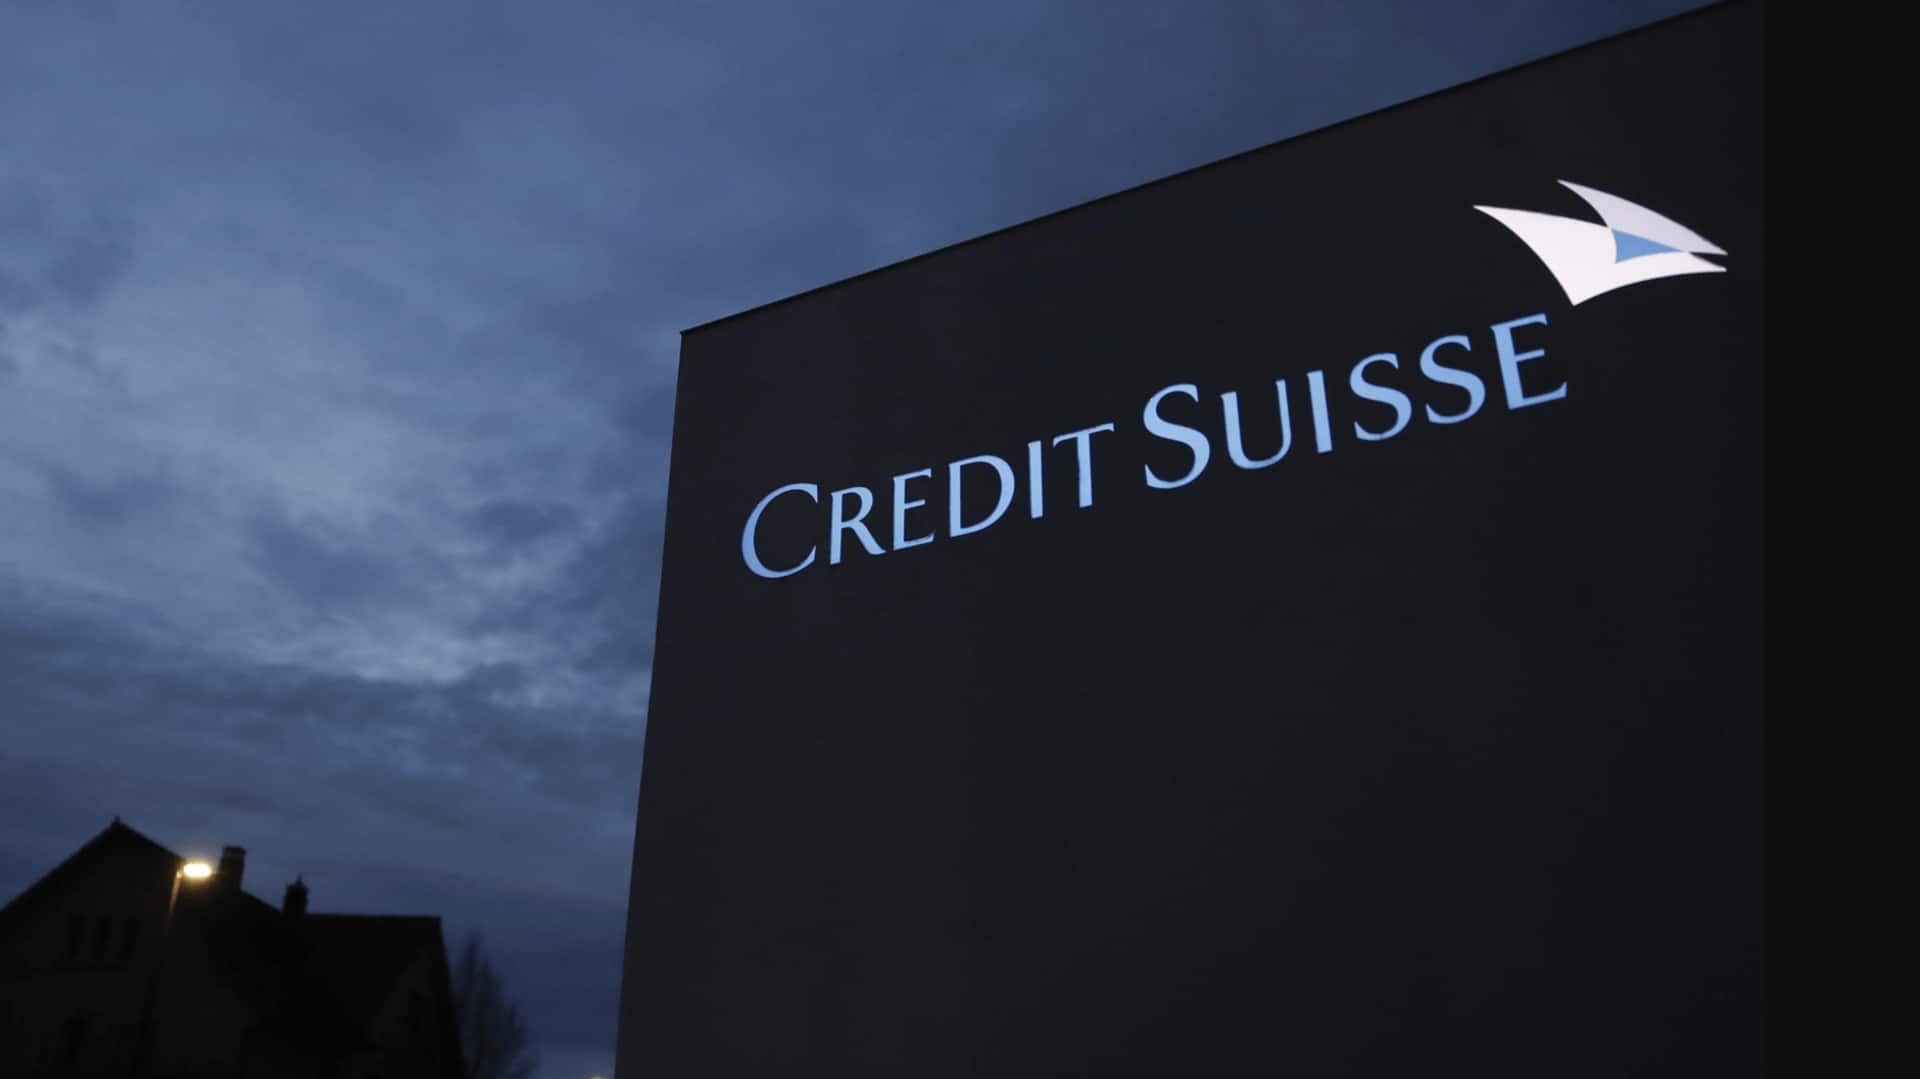 Credit Suisse's fall: Tale of scandals and poor choices